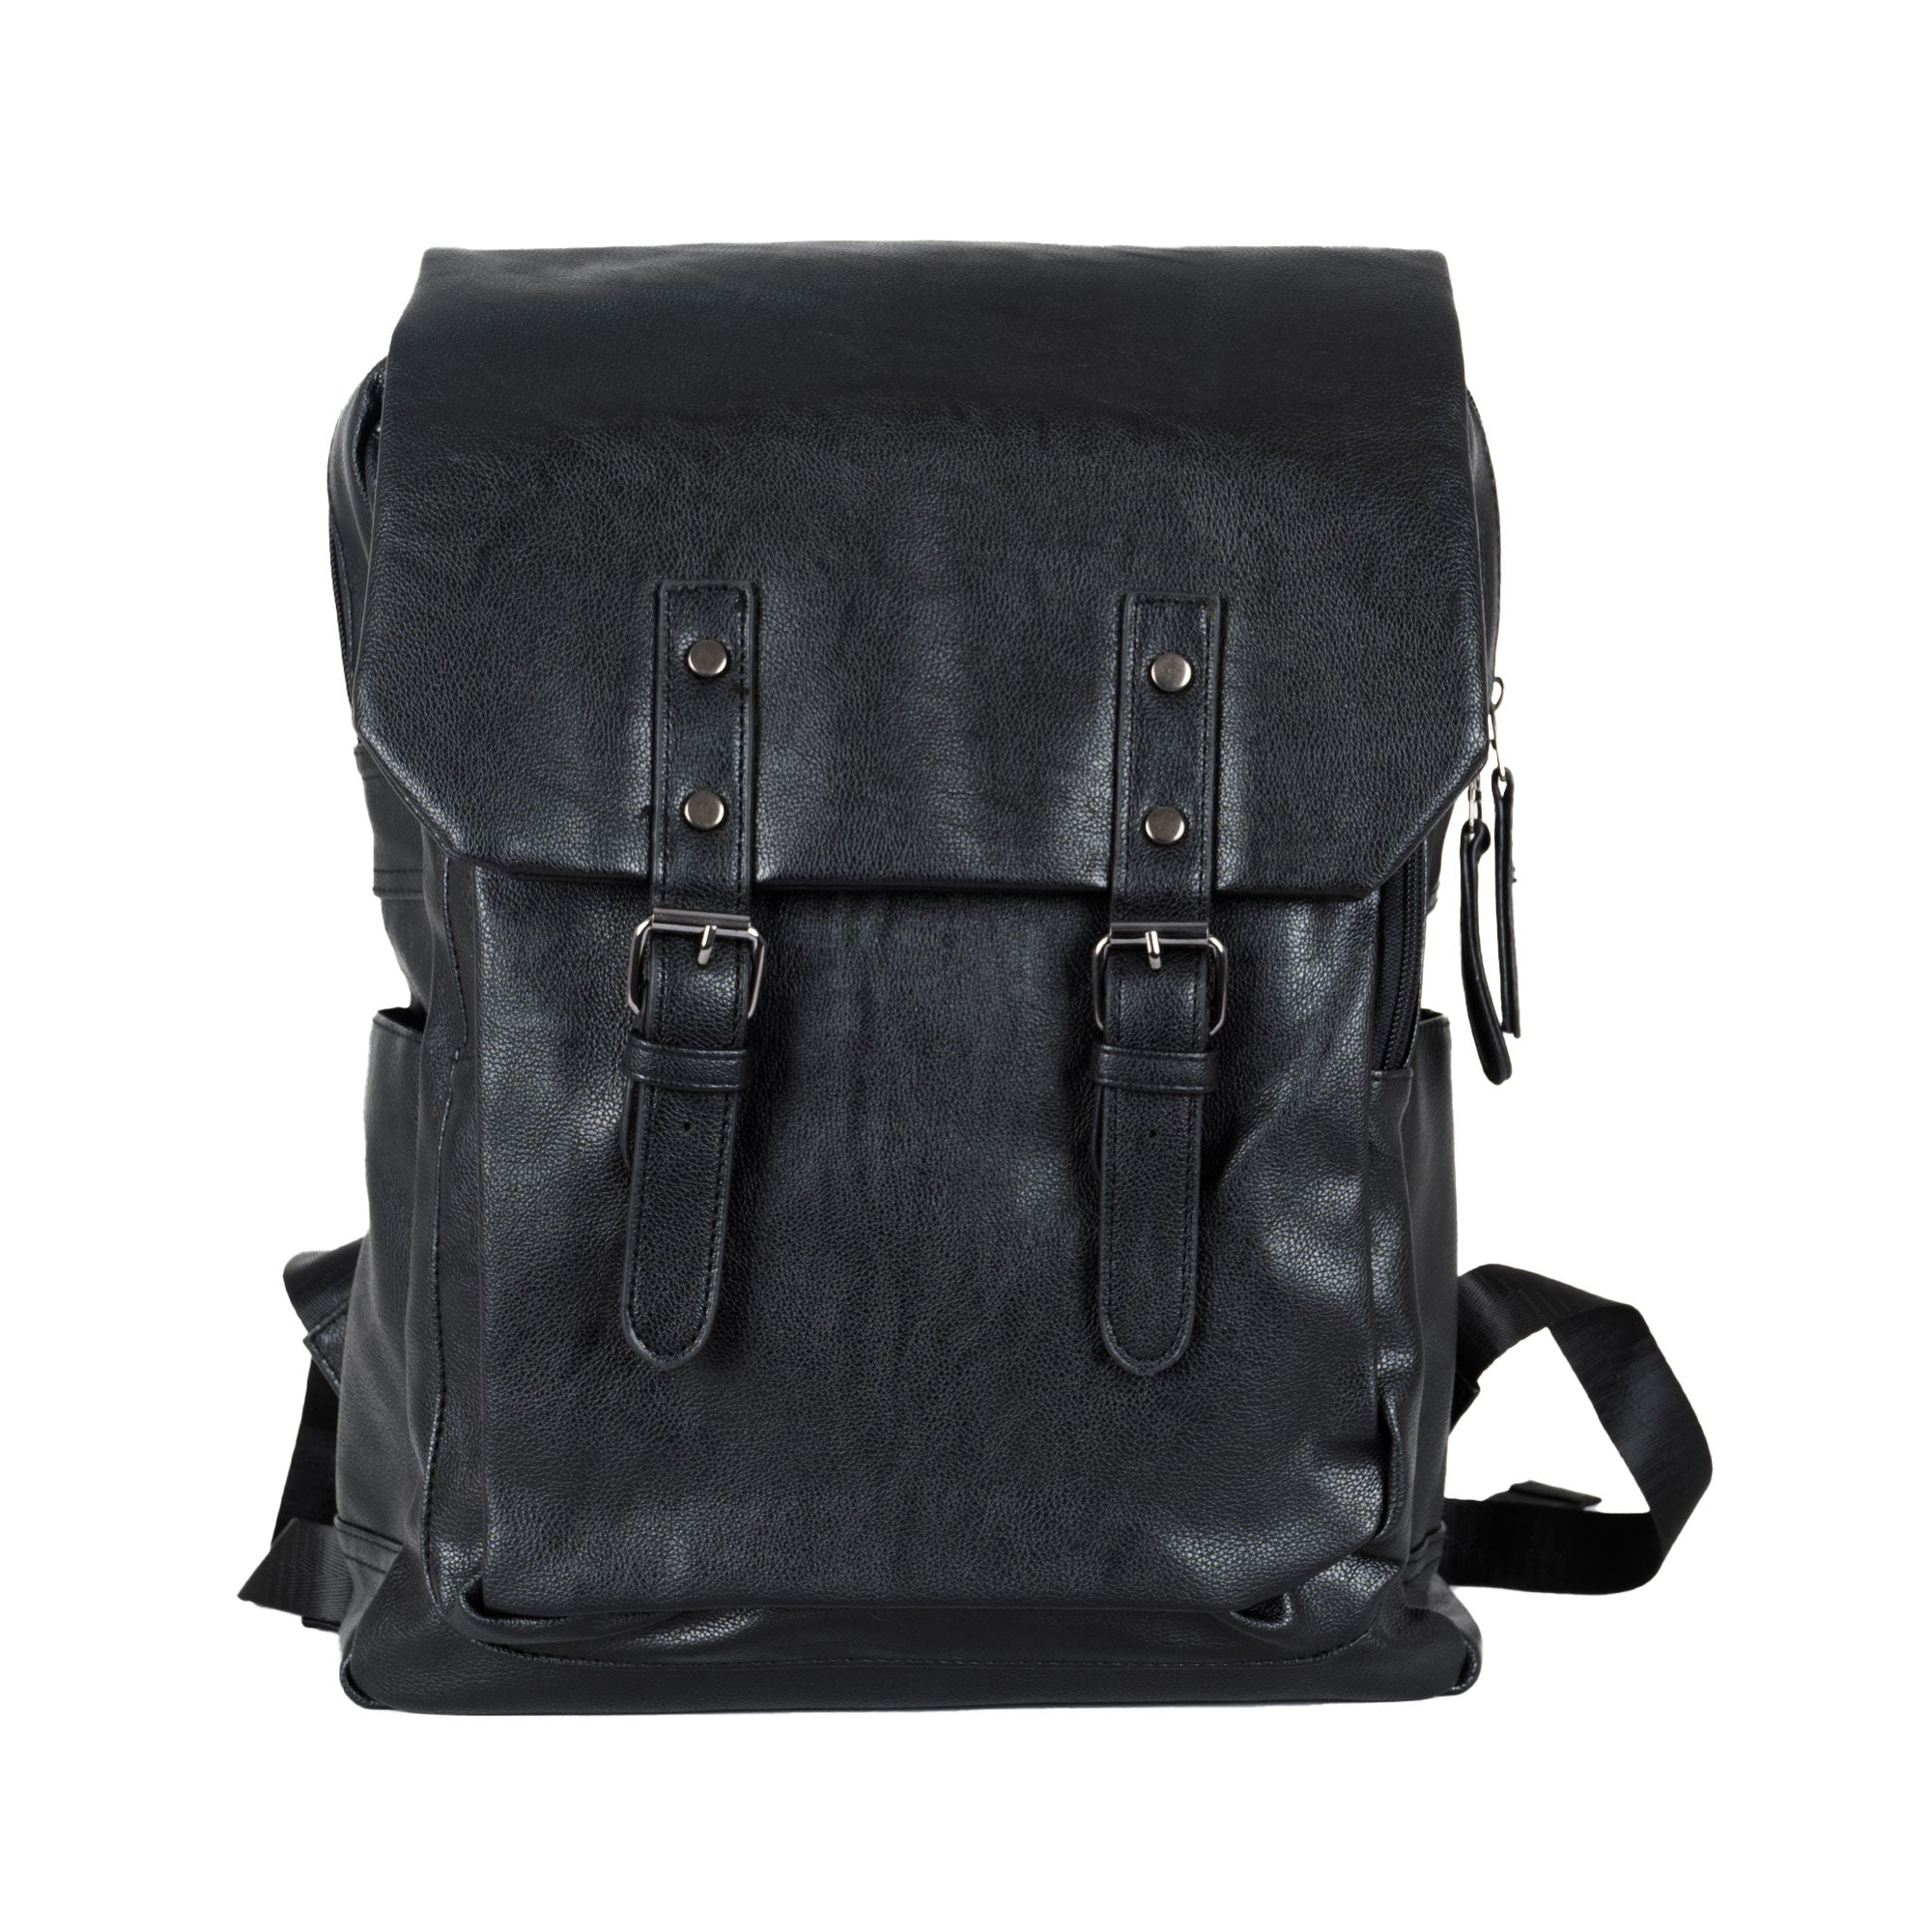 Unisex Casual Backpack Travel Bag